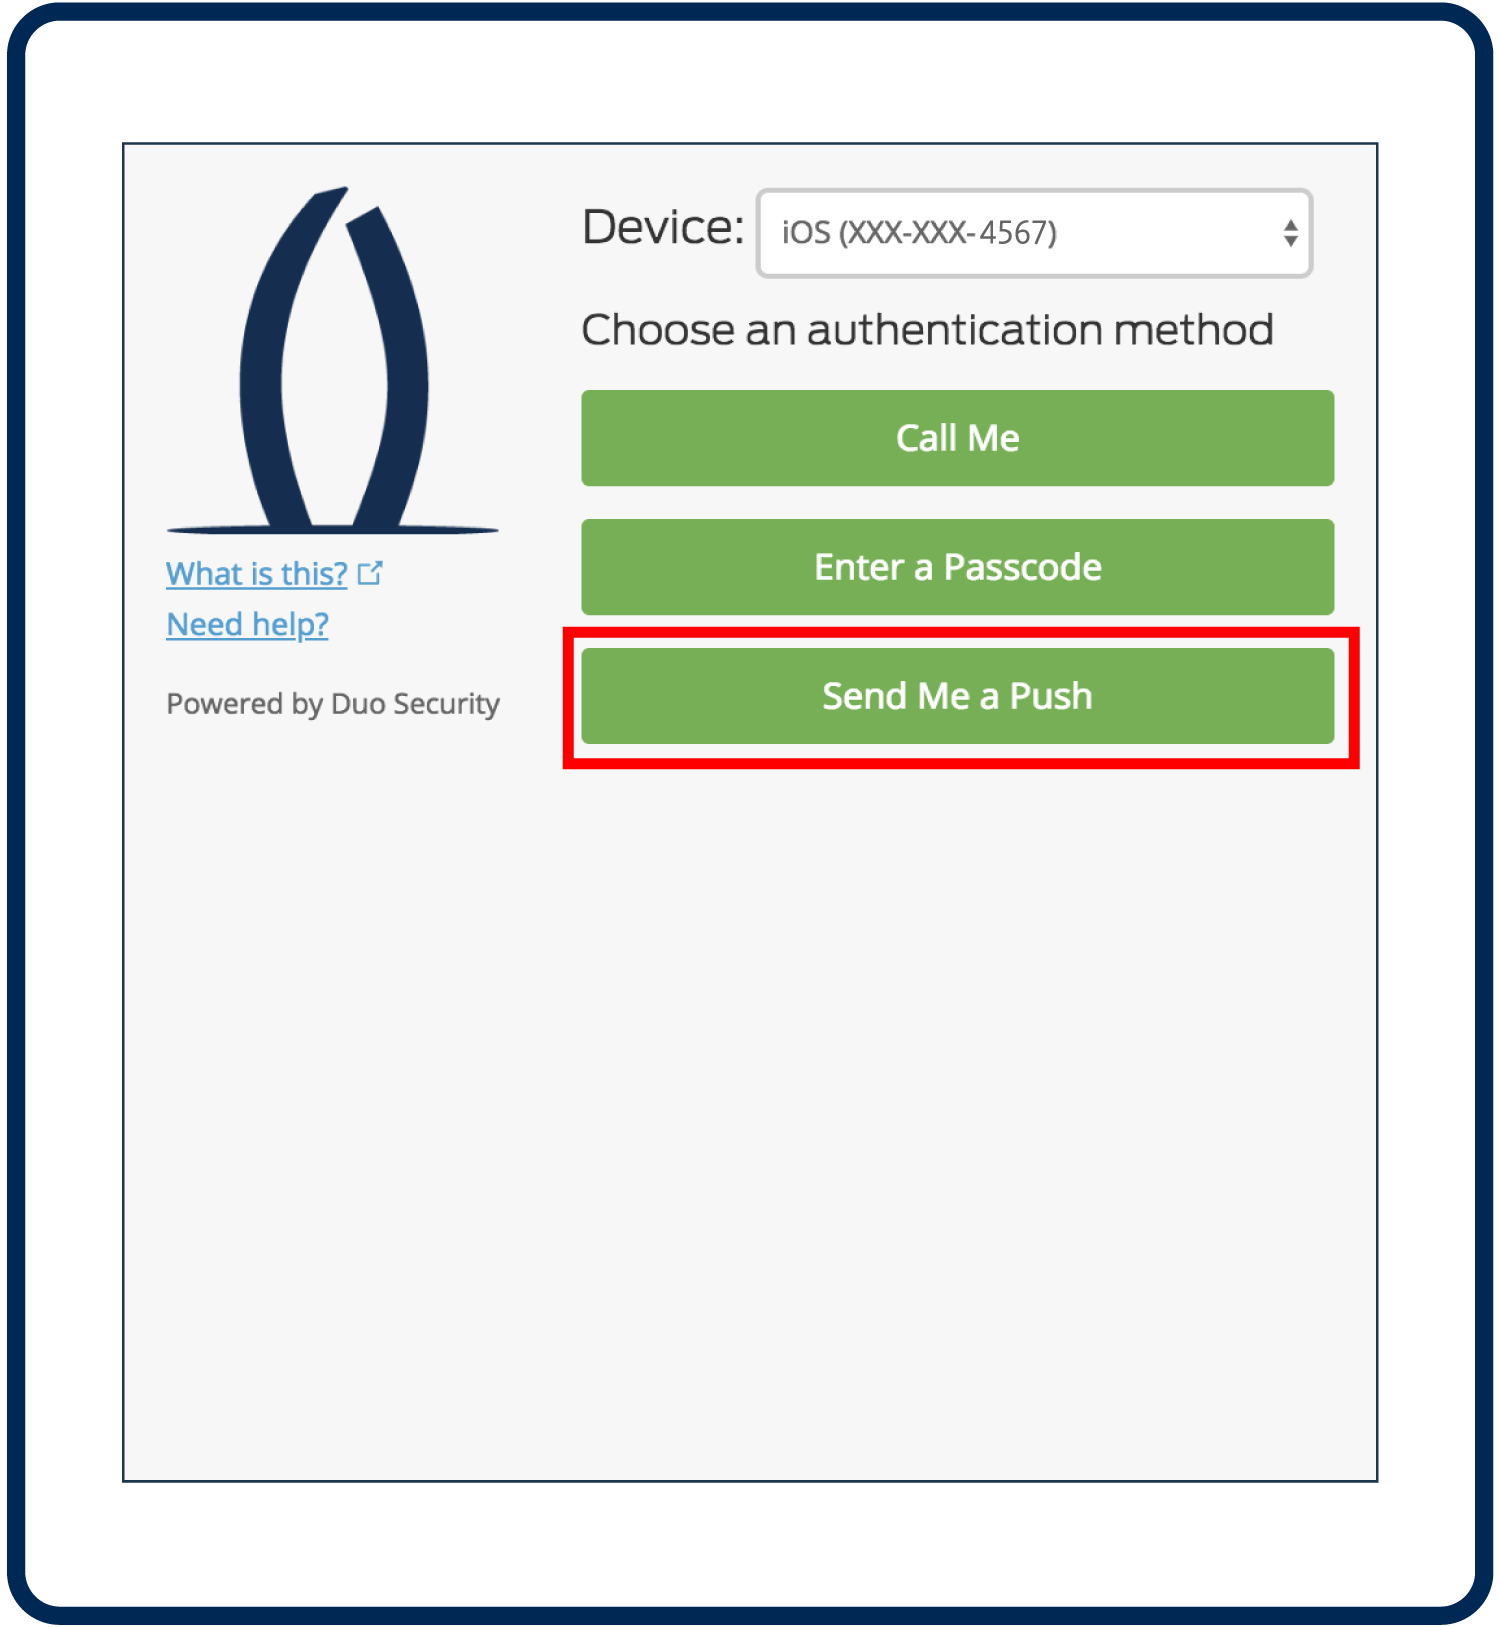 Screenshot of 2 Factor Authentication options, with a box around "Send me a Push" button